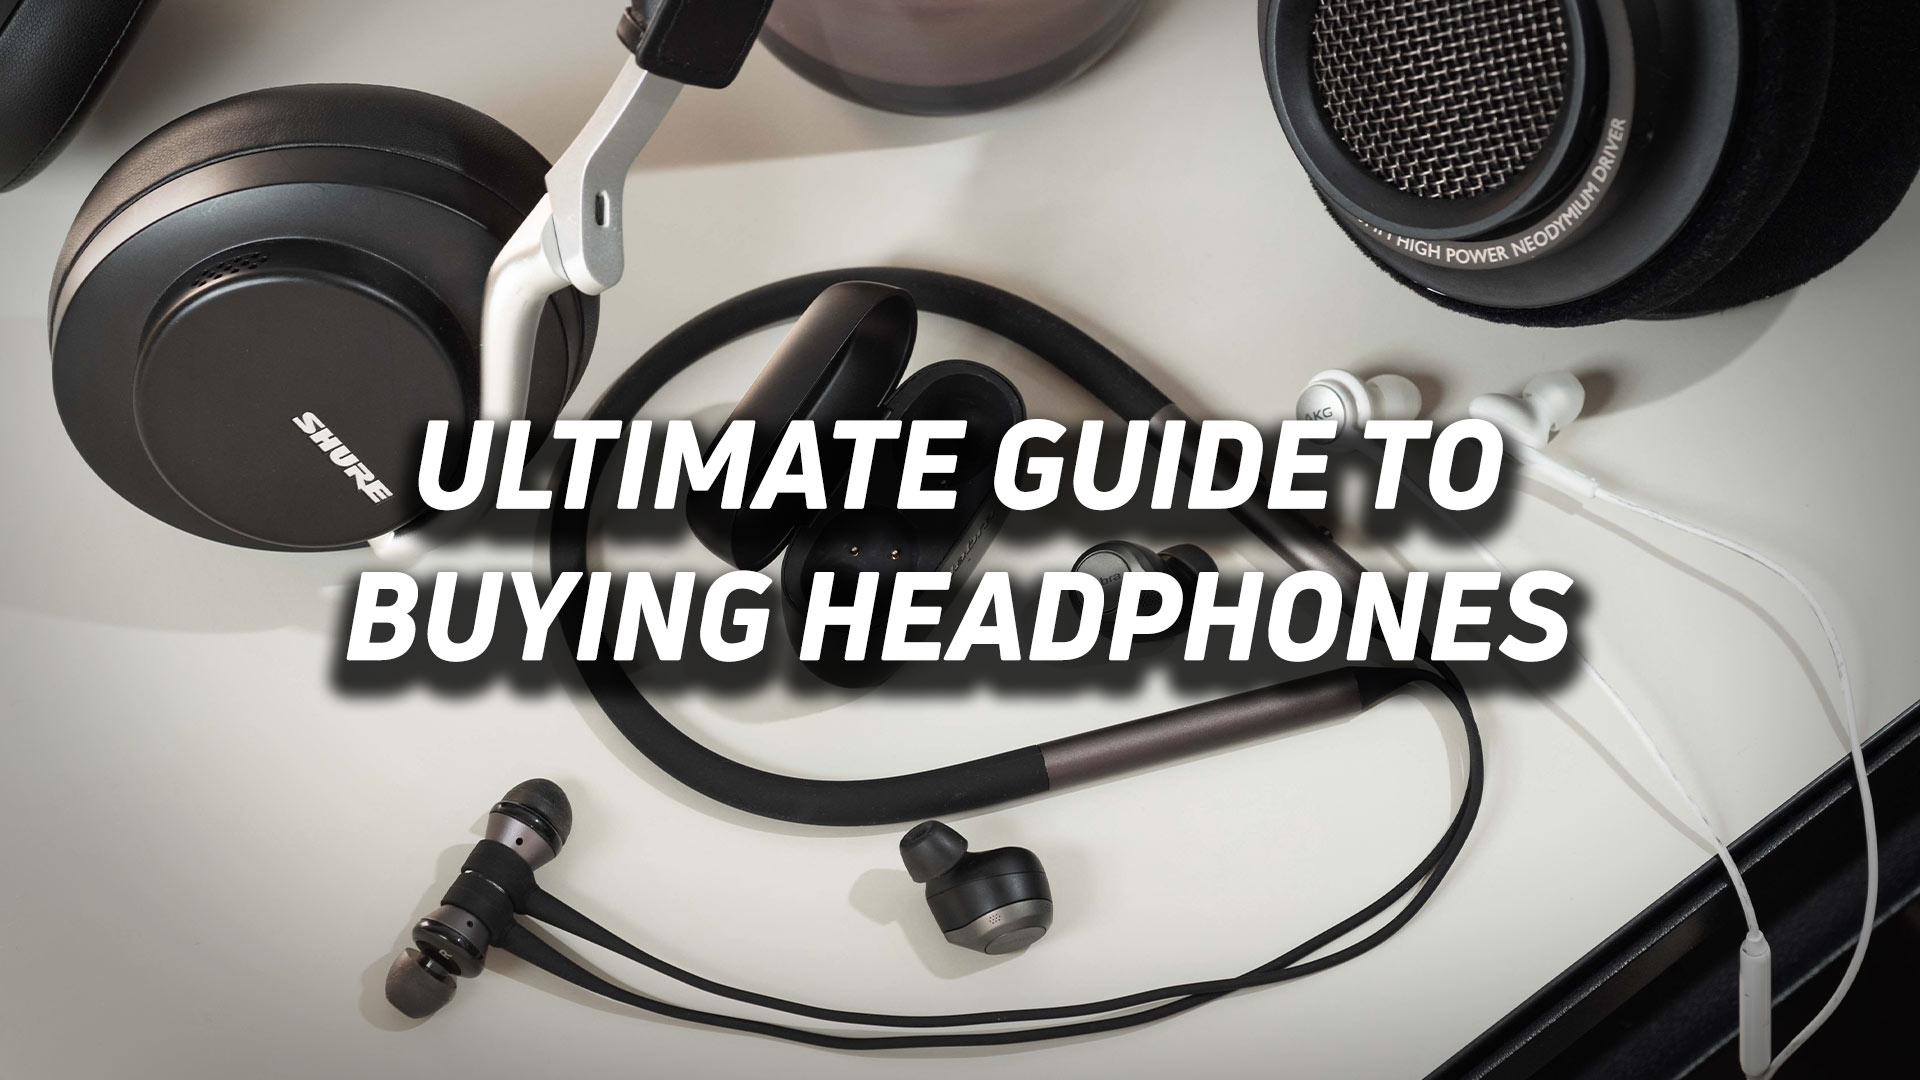 How to Connect Bose Headphones to New Device: Ultimate Guide